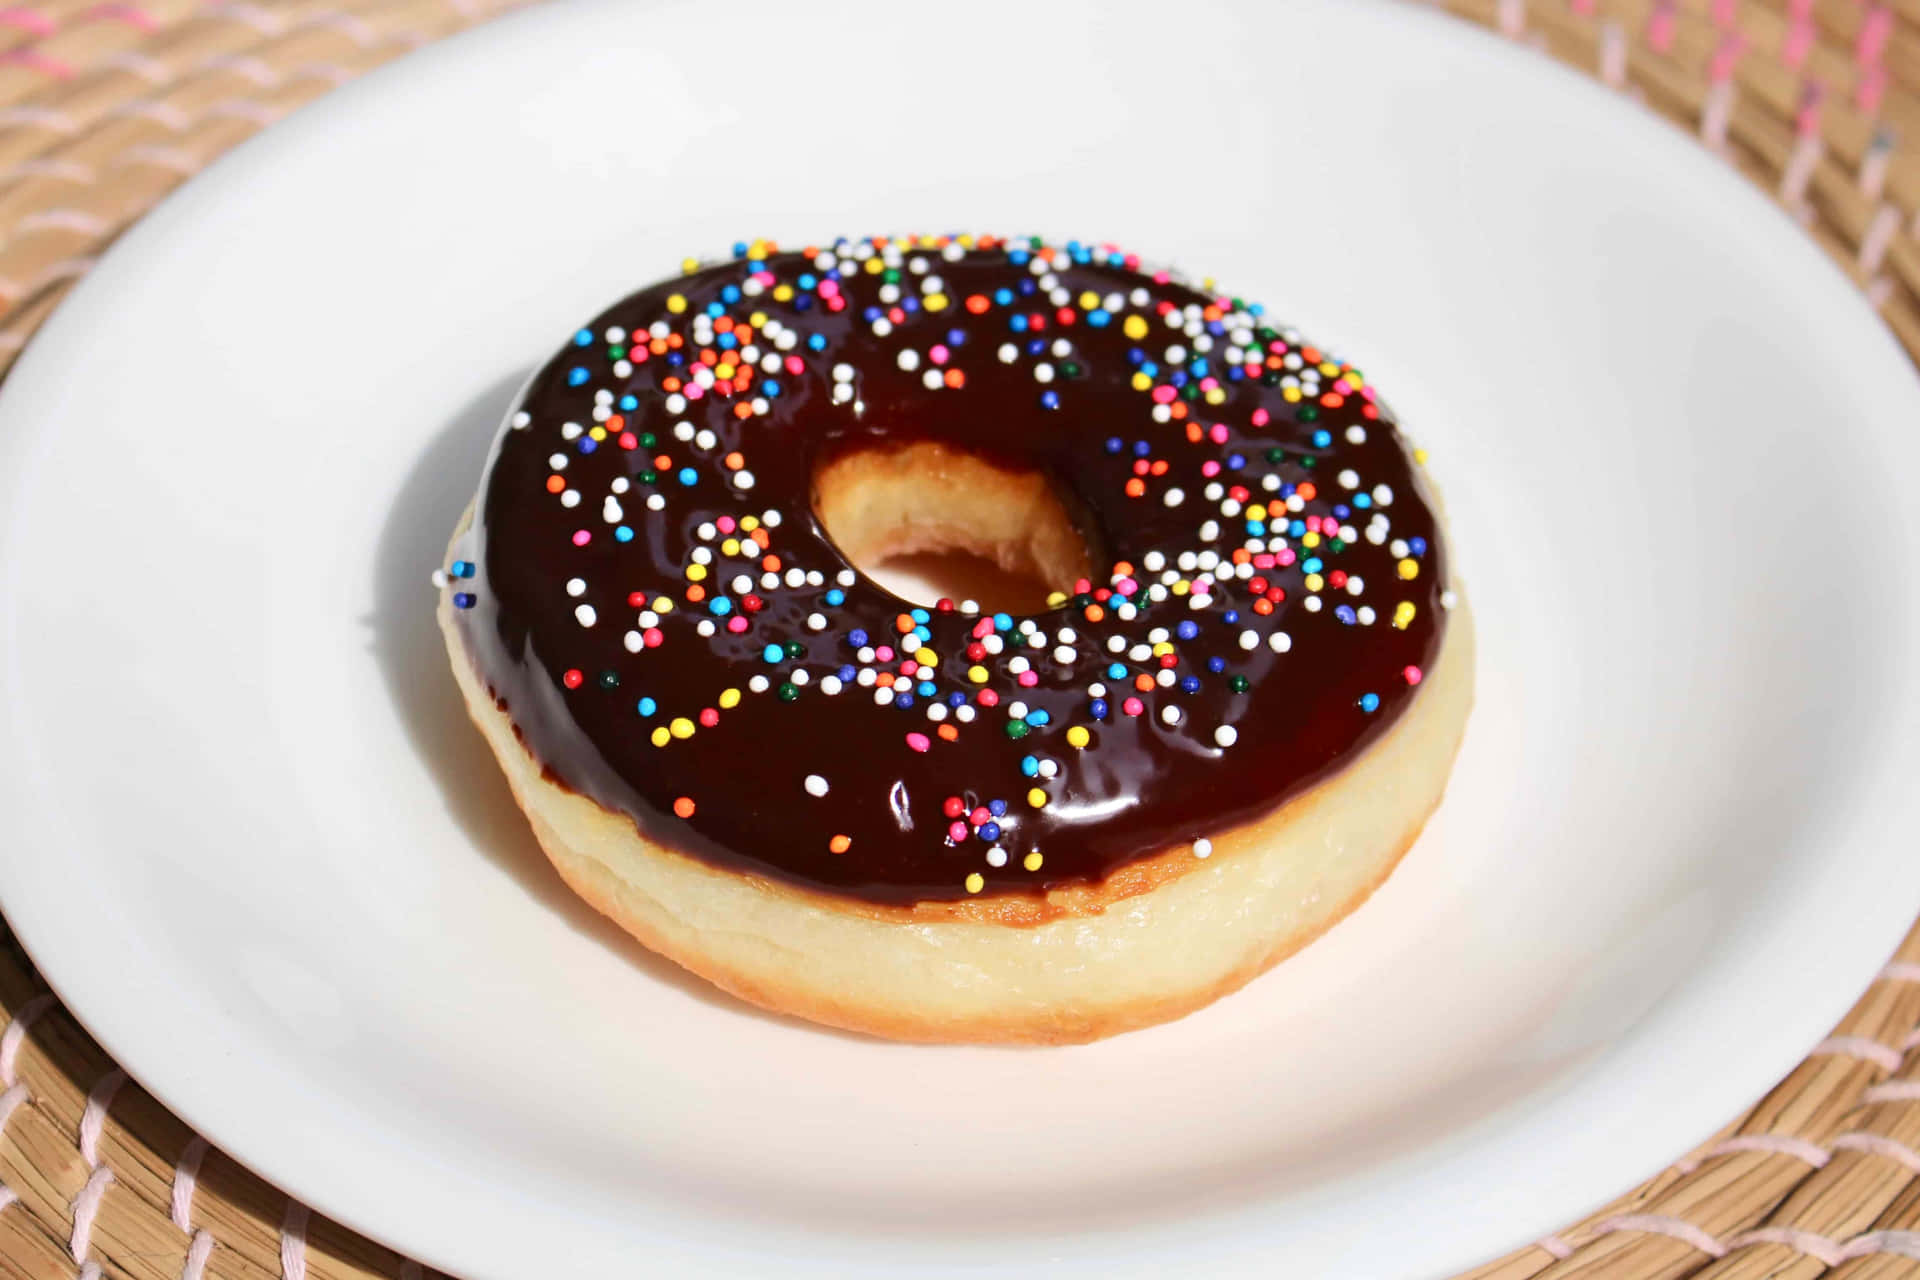 A tasty donut ready for any occasion!